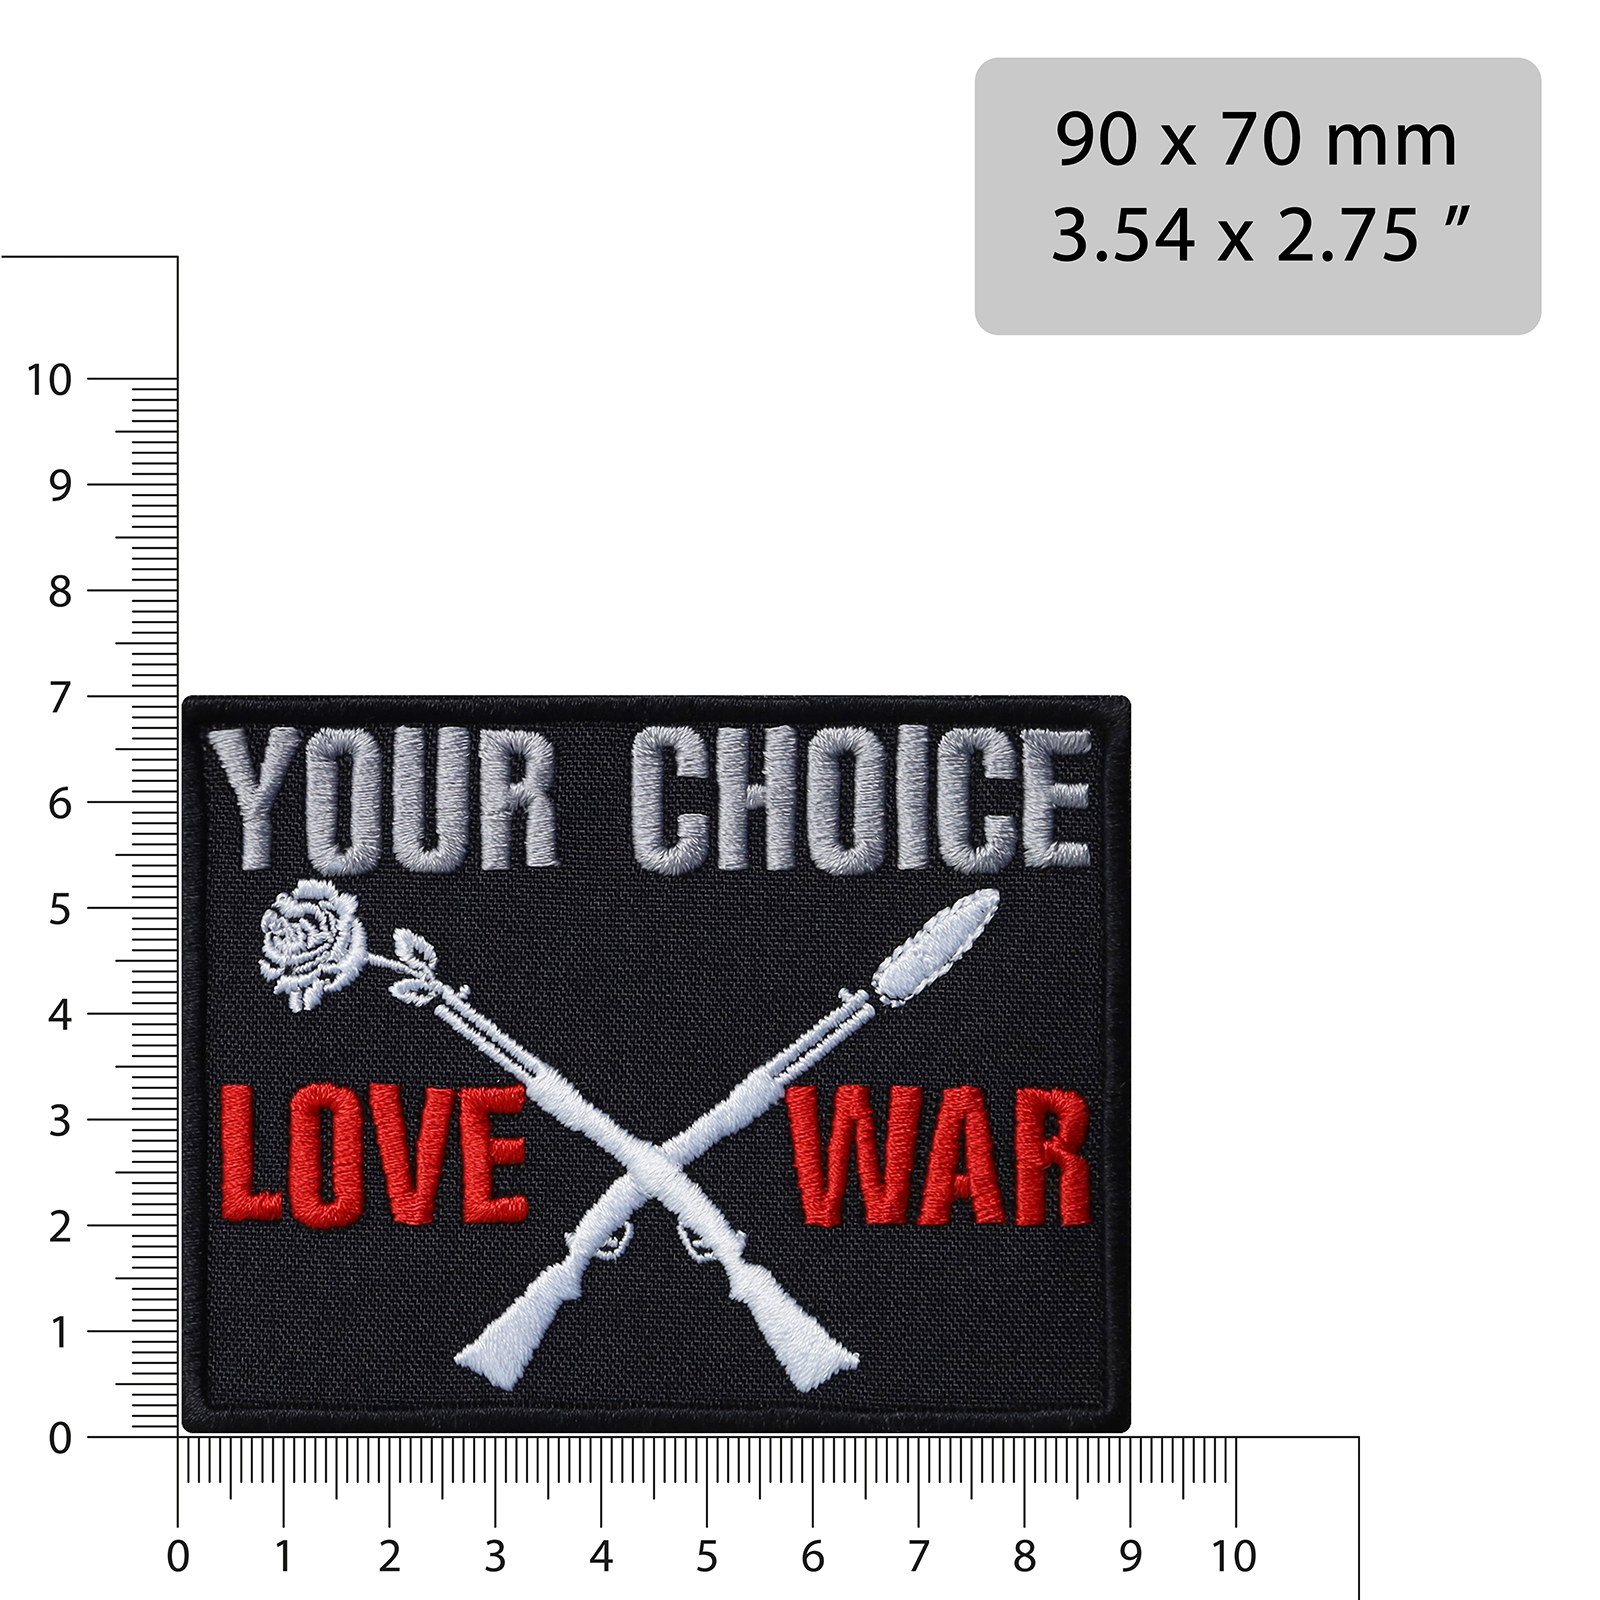 Your choice - Love or War - Patch